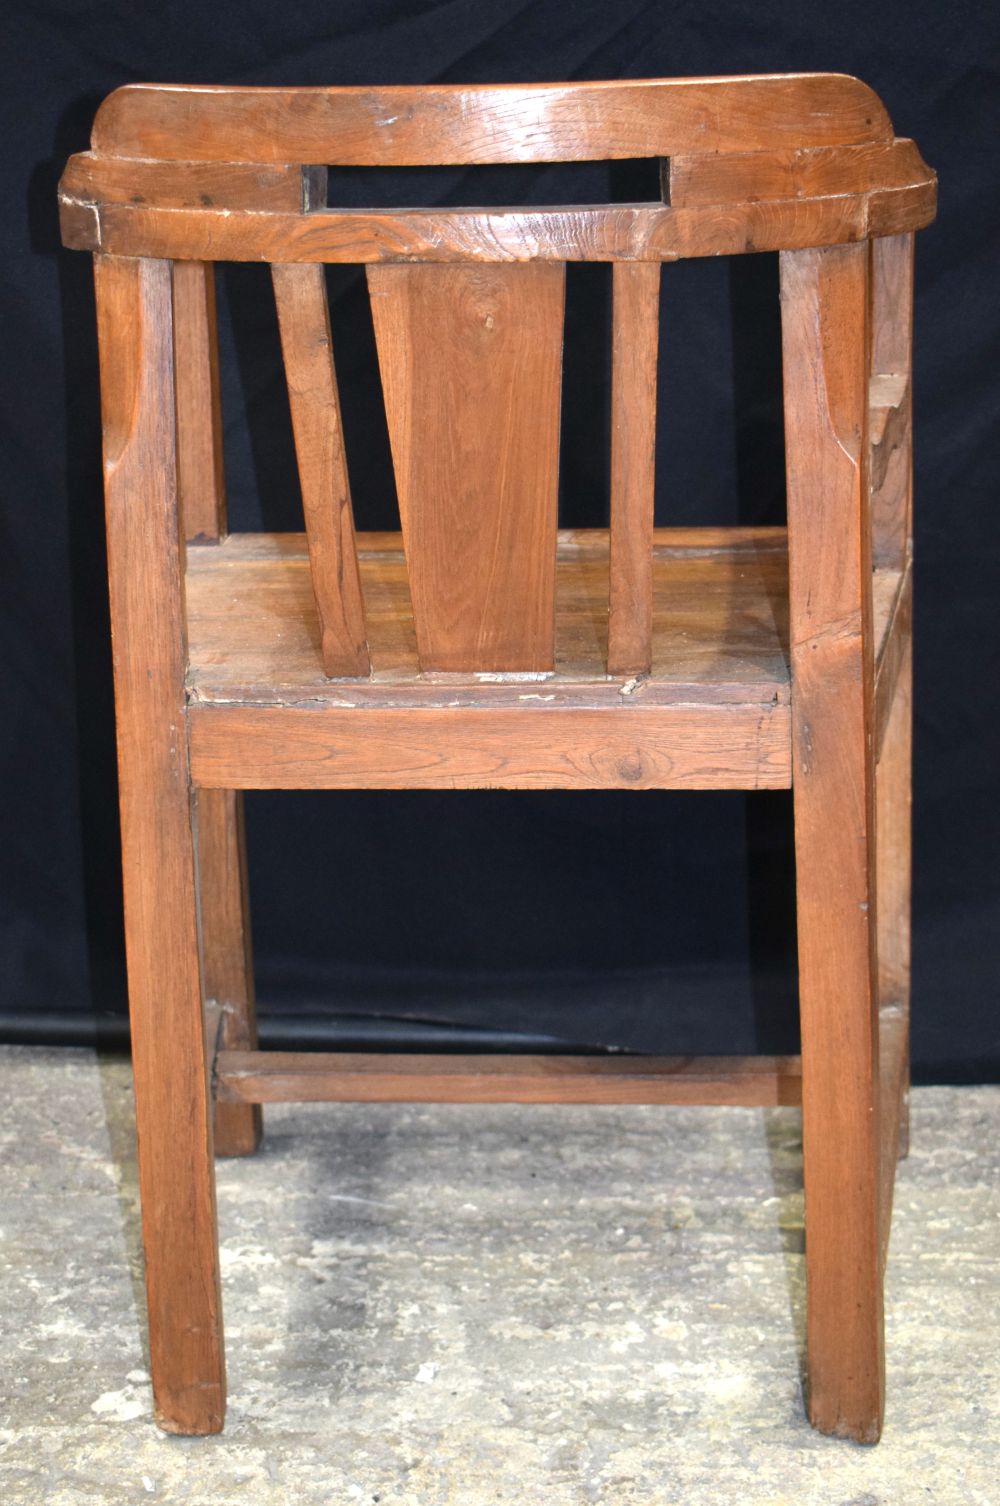 An Indian teak chair 78 x 51 cm - Image 7 of 8